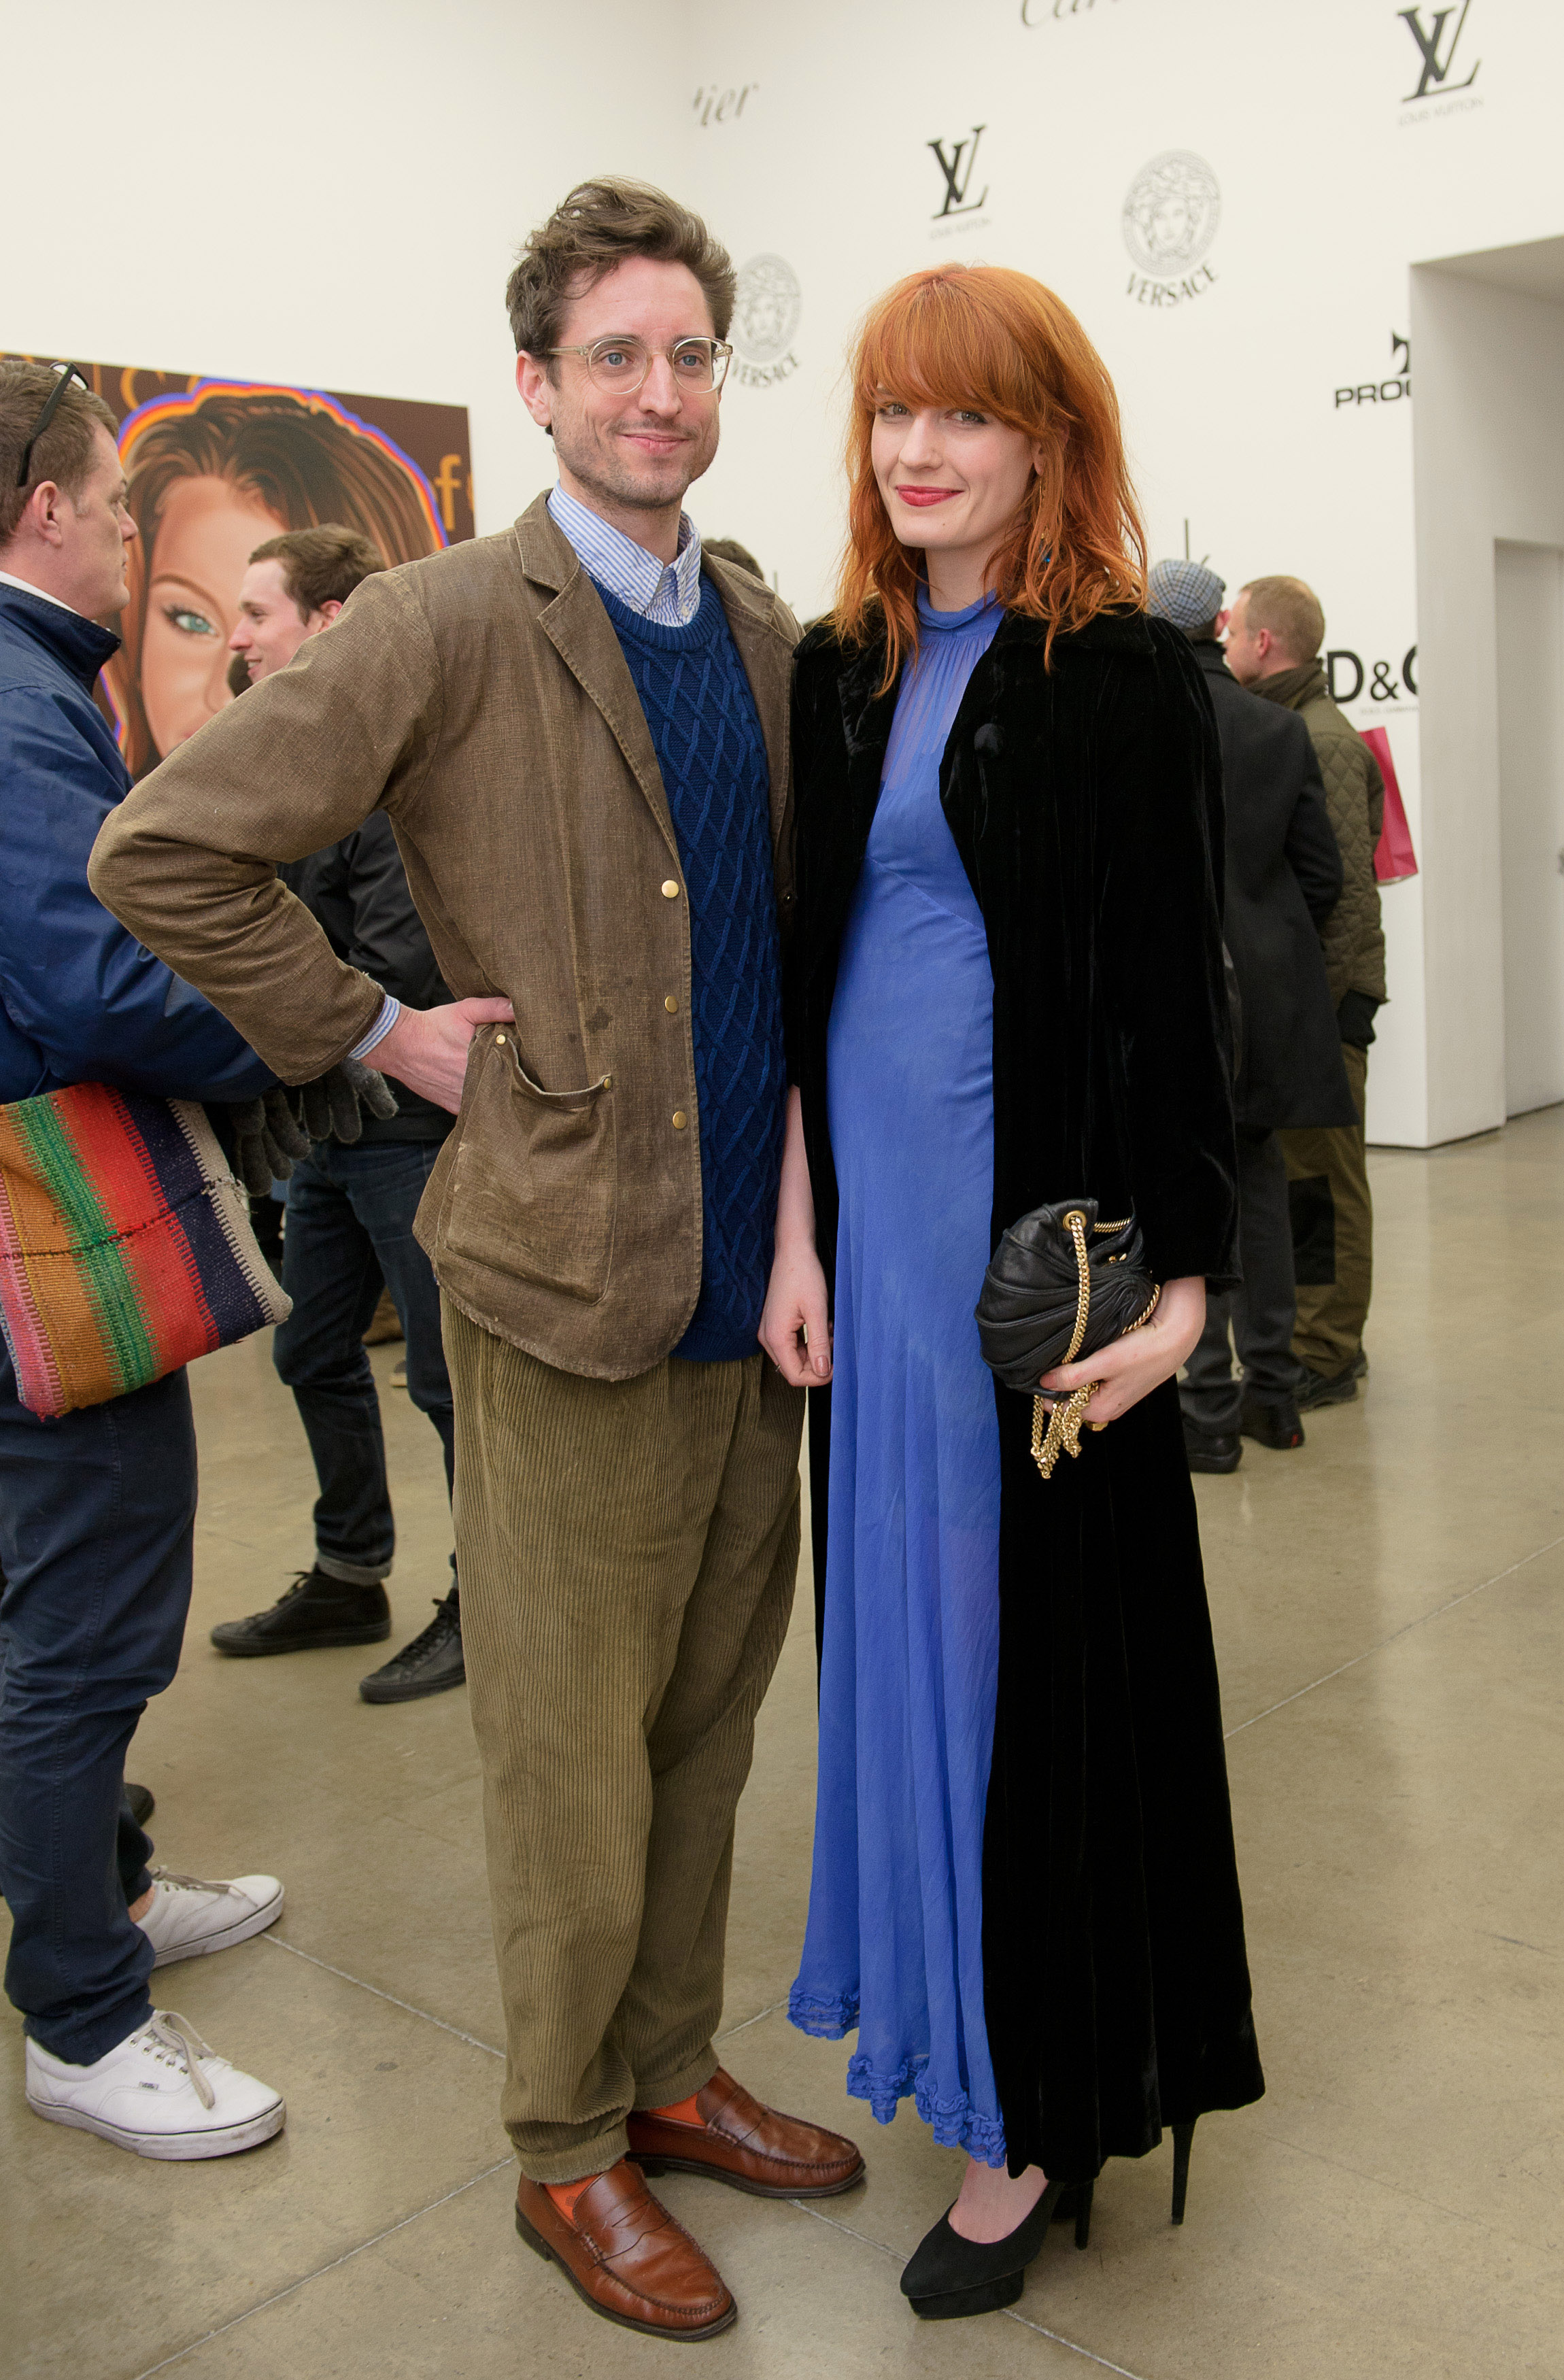 Stuart Hammond and Florence Welch at the Richard Phillips "Most Wanted" exhibition on January 27, 2011, in London | Source: Getty Images